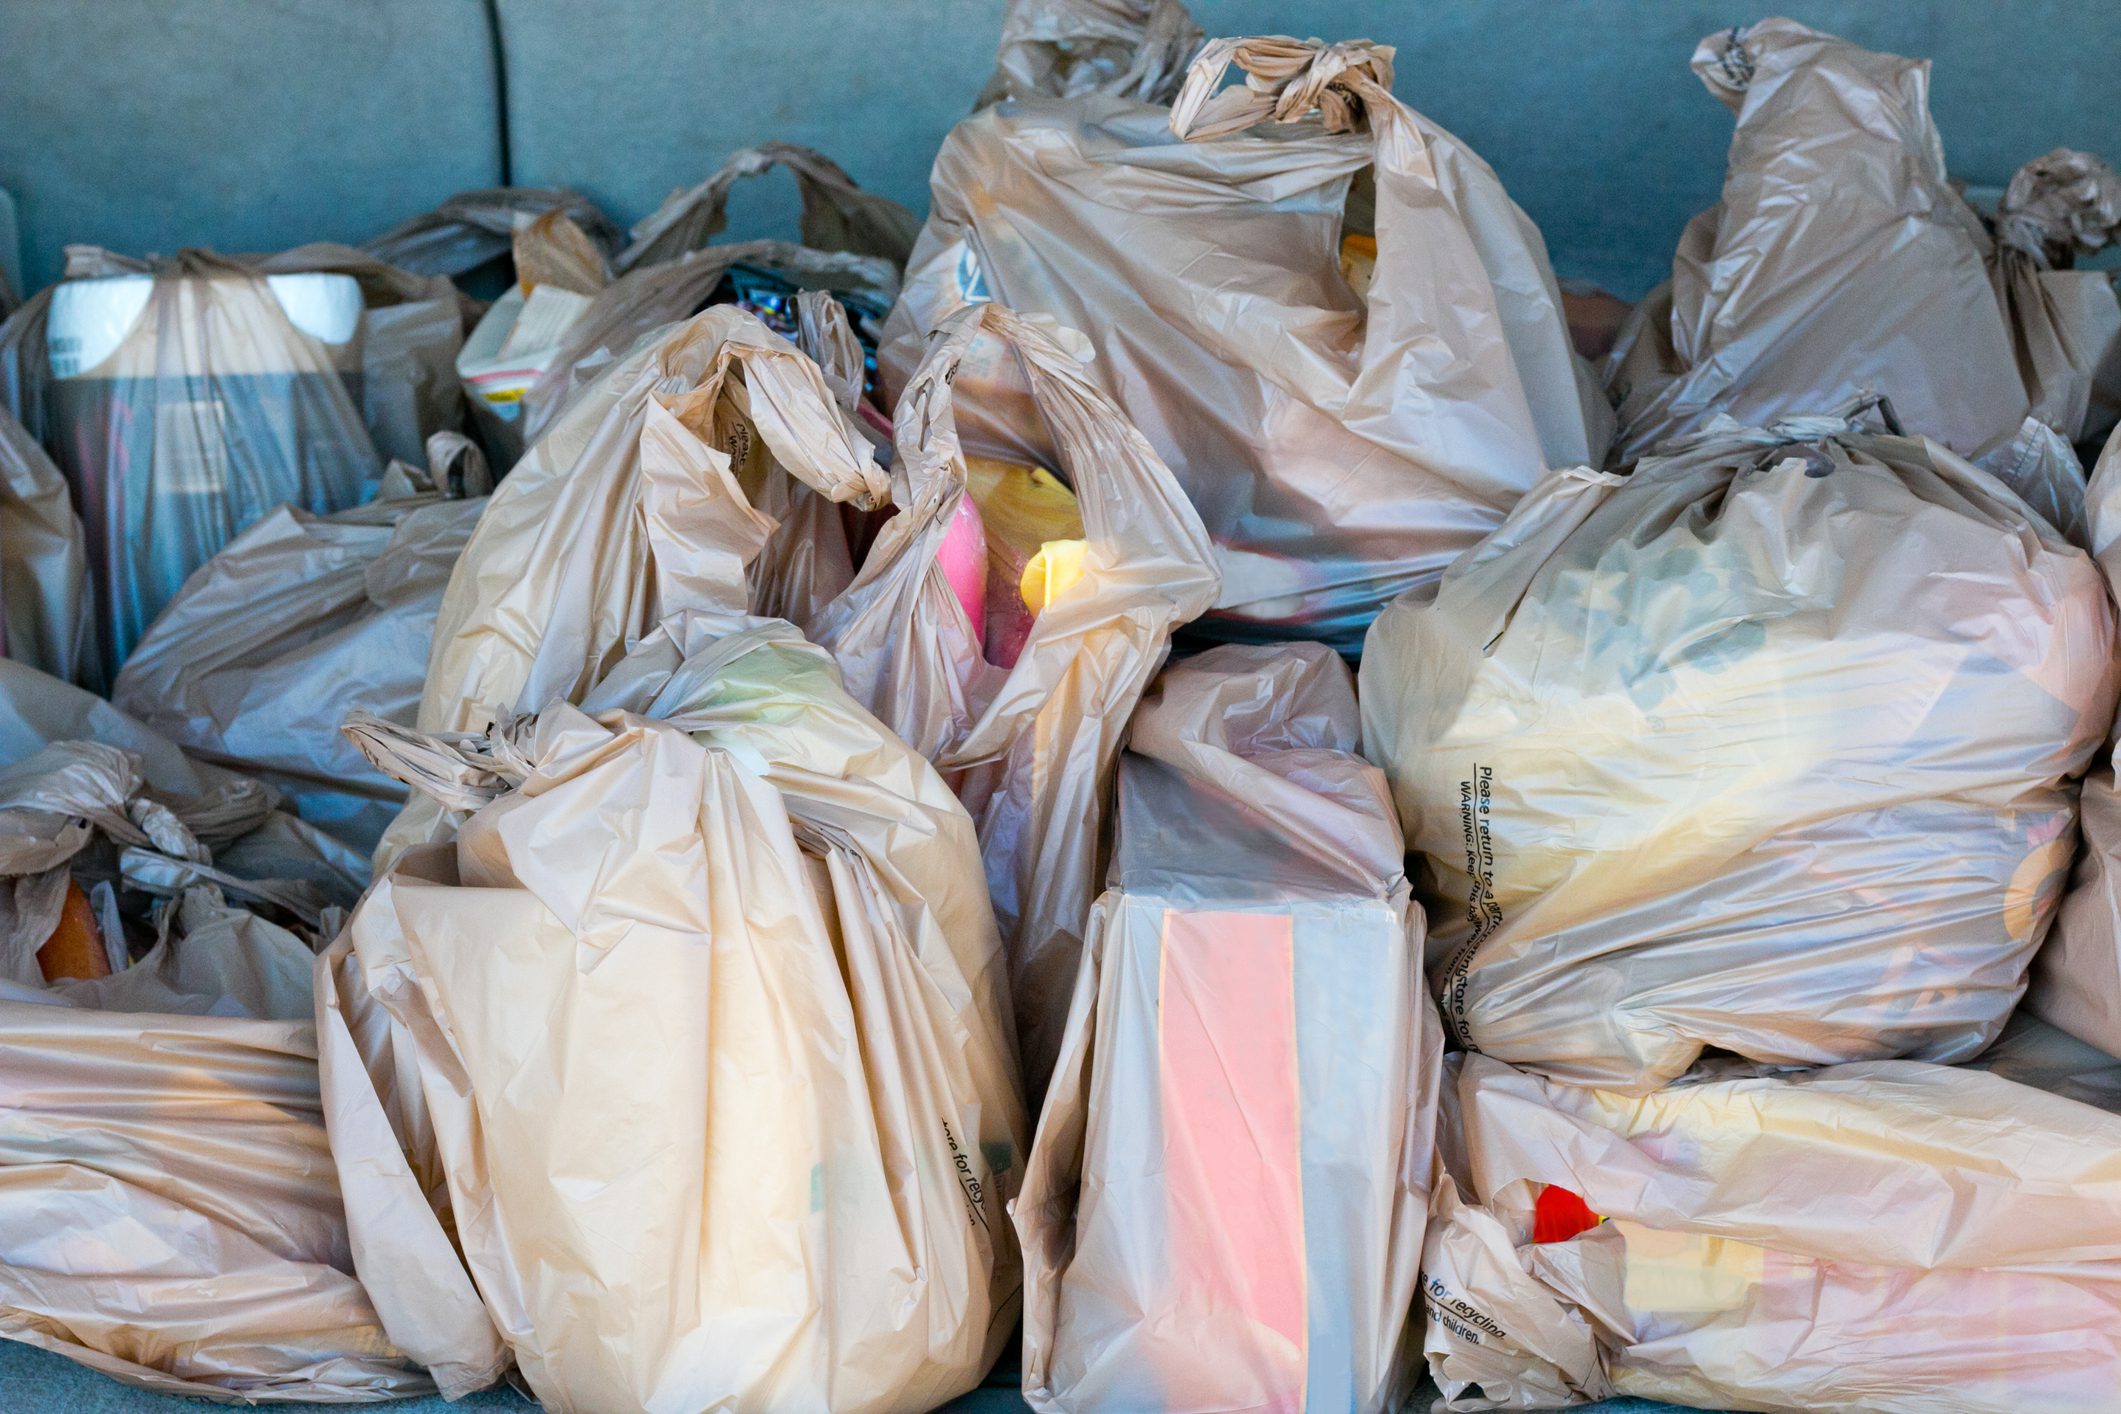 Plastic bags full of groceries in the trunk of a car